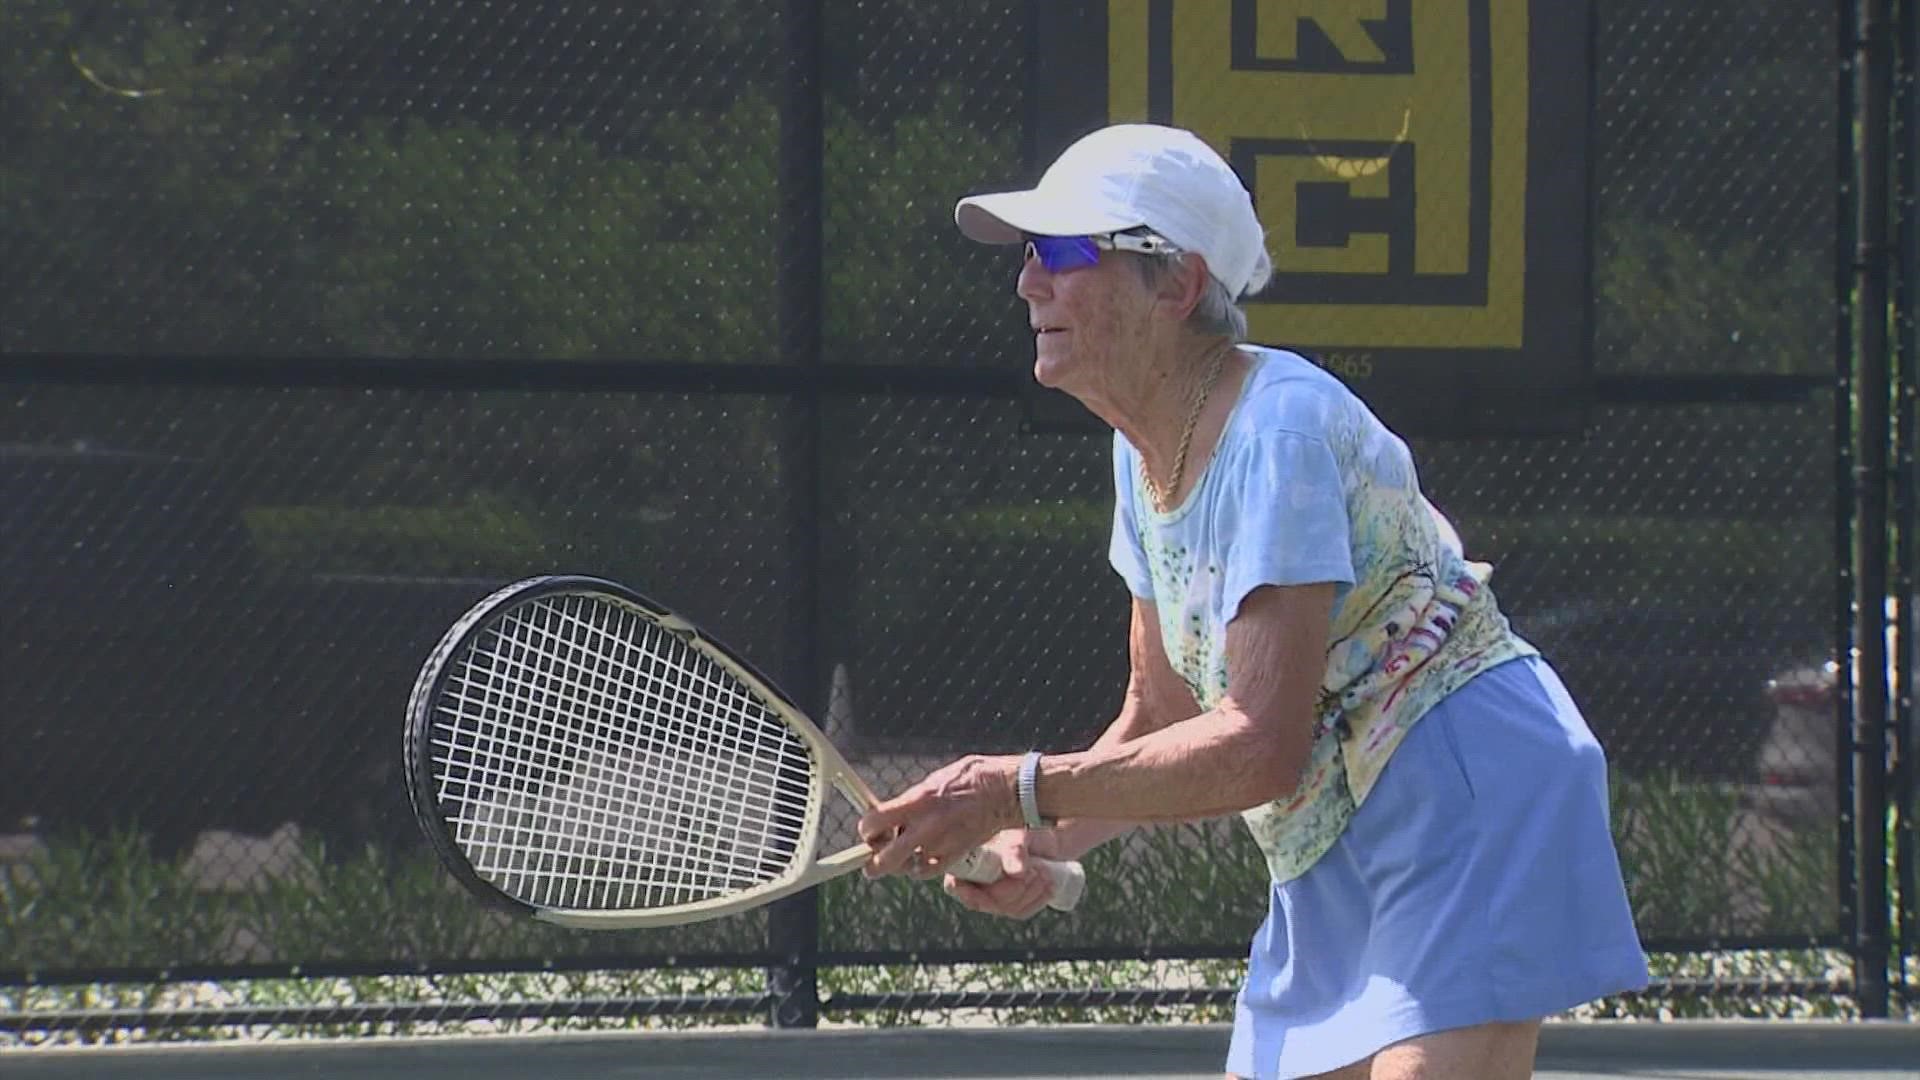 Has the game passed her? Not even close. A better question is can tennis keep up with Margaret Canby?